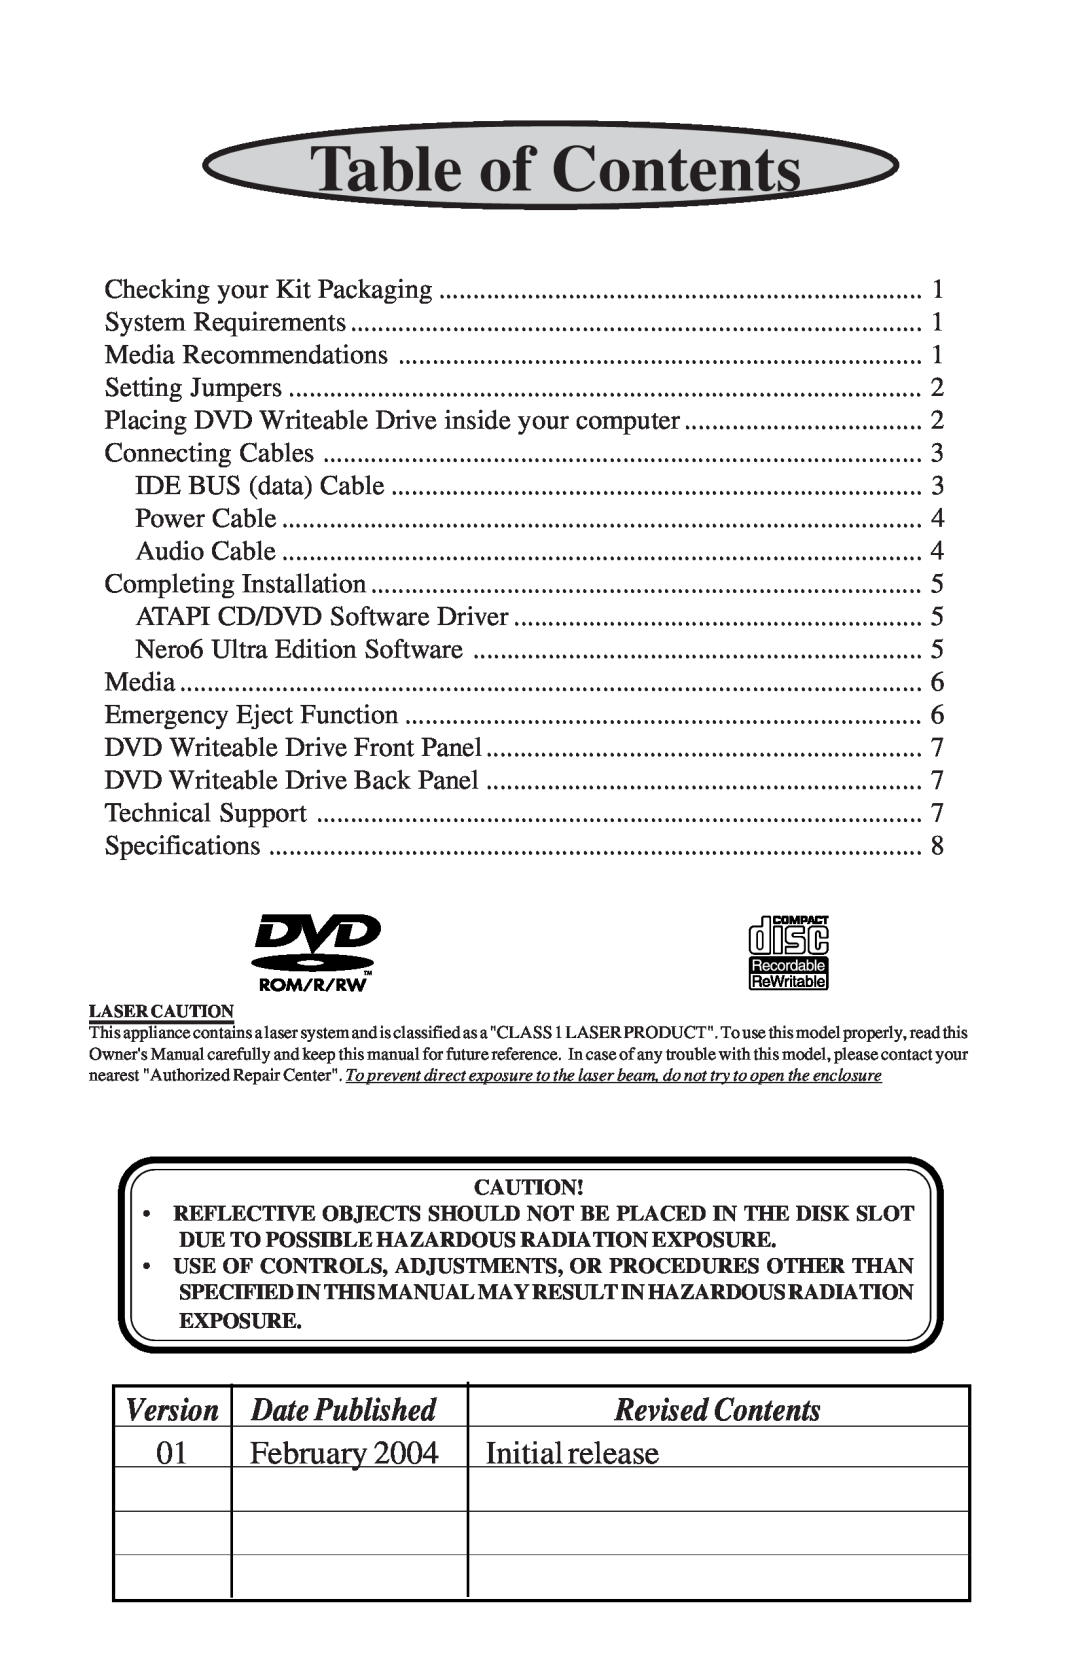 Toshiba SD-R5272 Date Published, Revised Contents, February, Initial release, Version, Table of Contents 